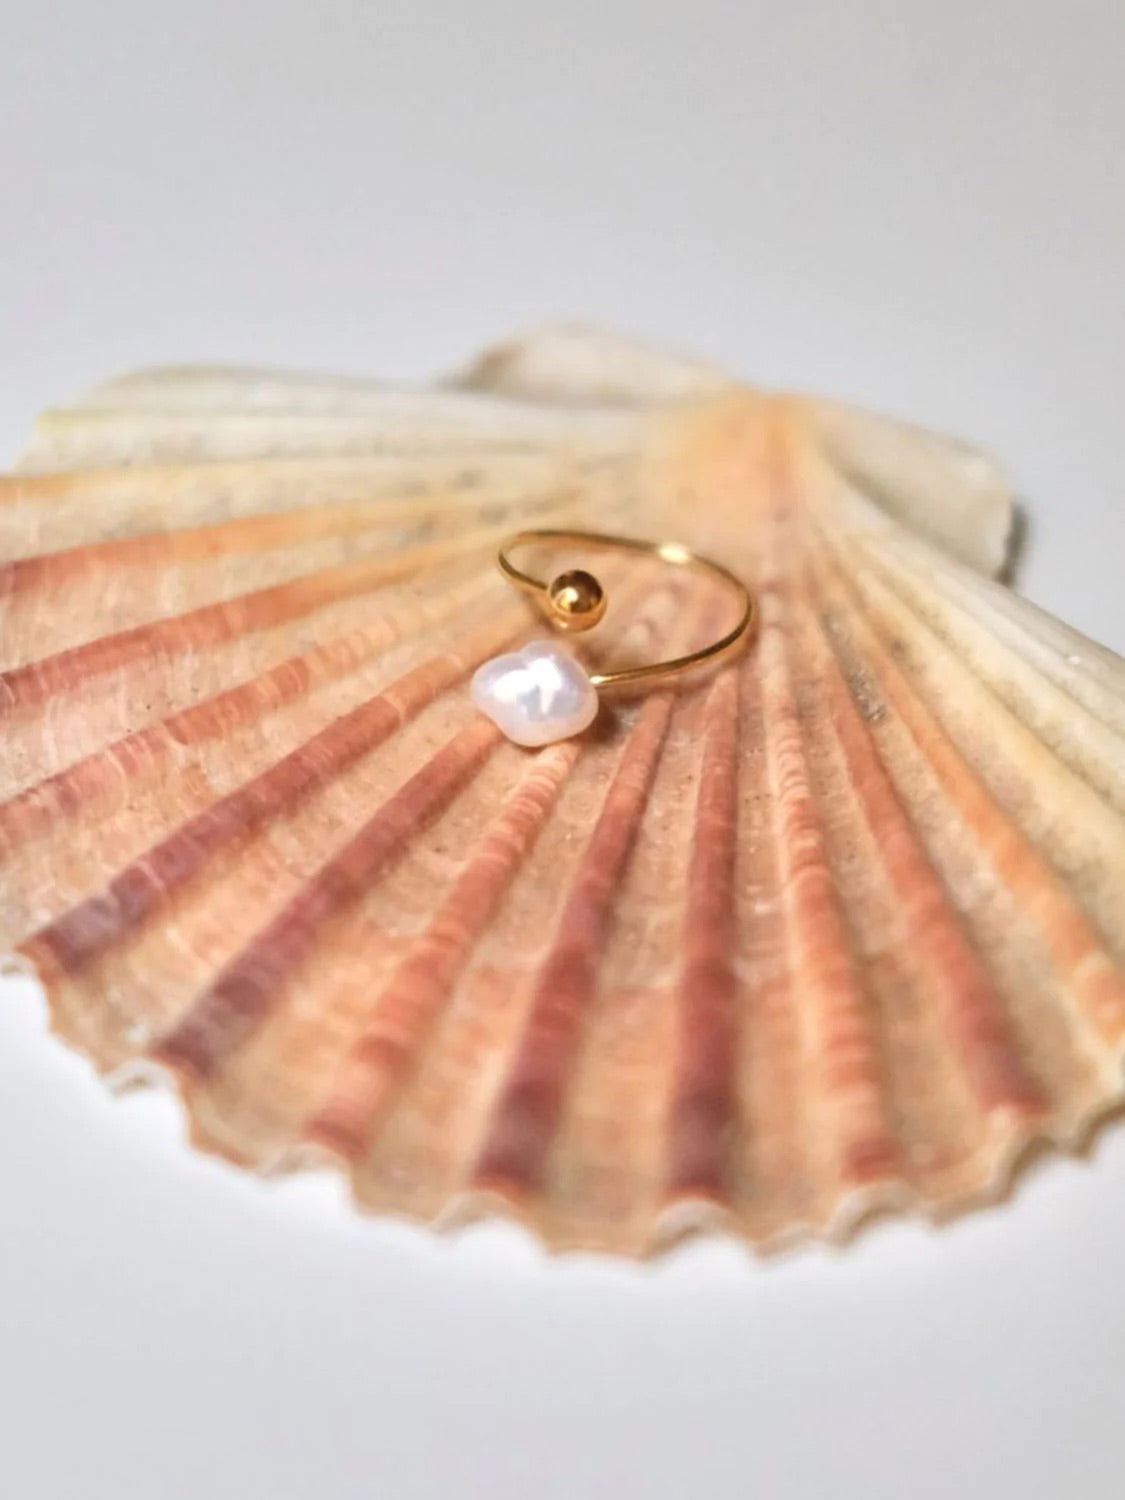 Paulina Ring Ring  -  925 Silver, Gold Plated  baroque pearl